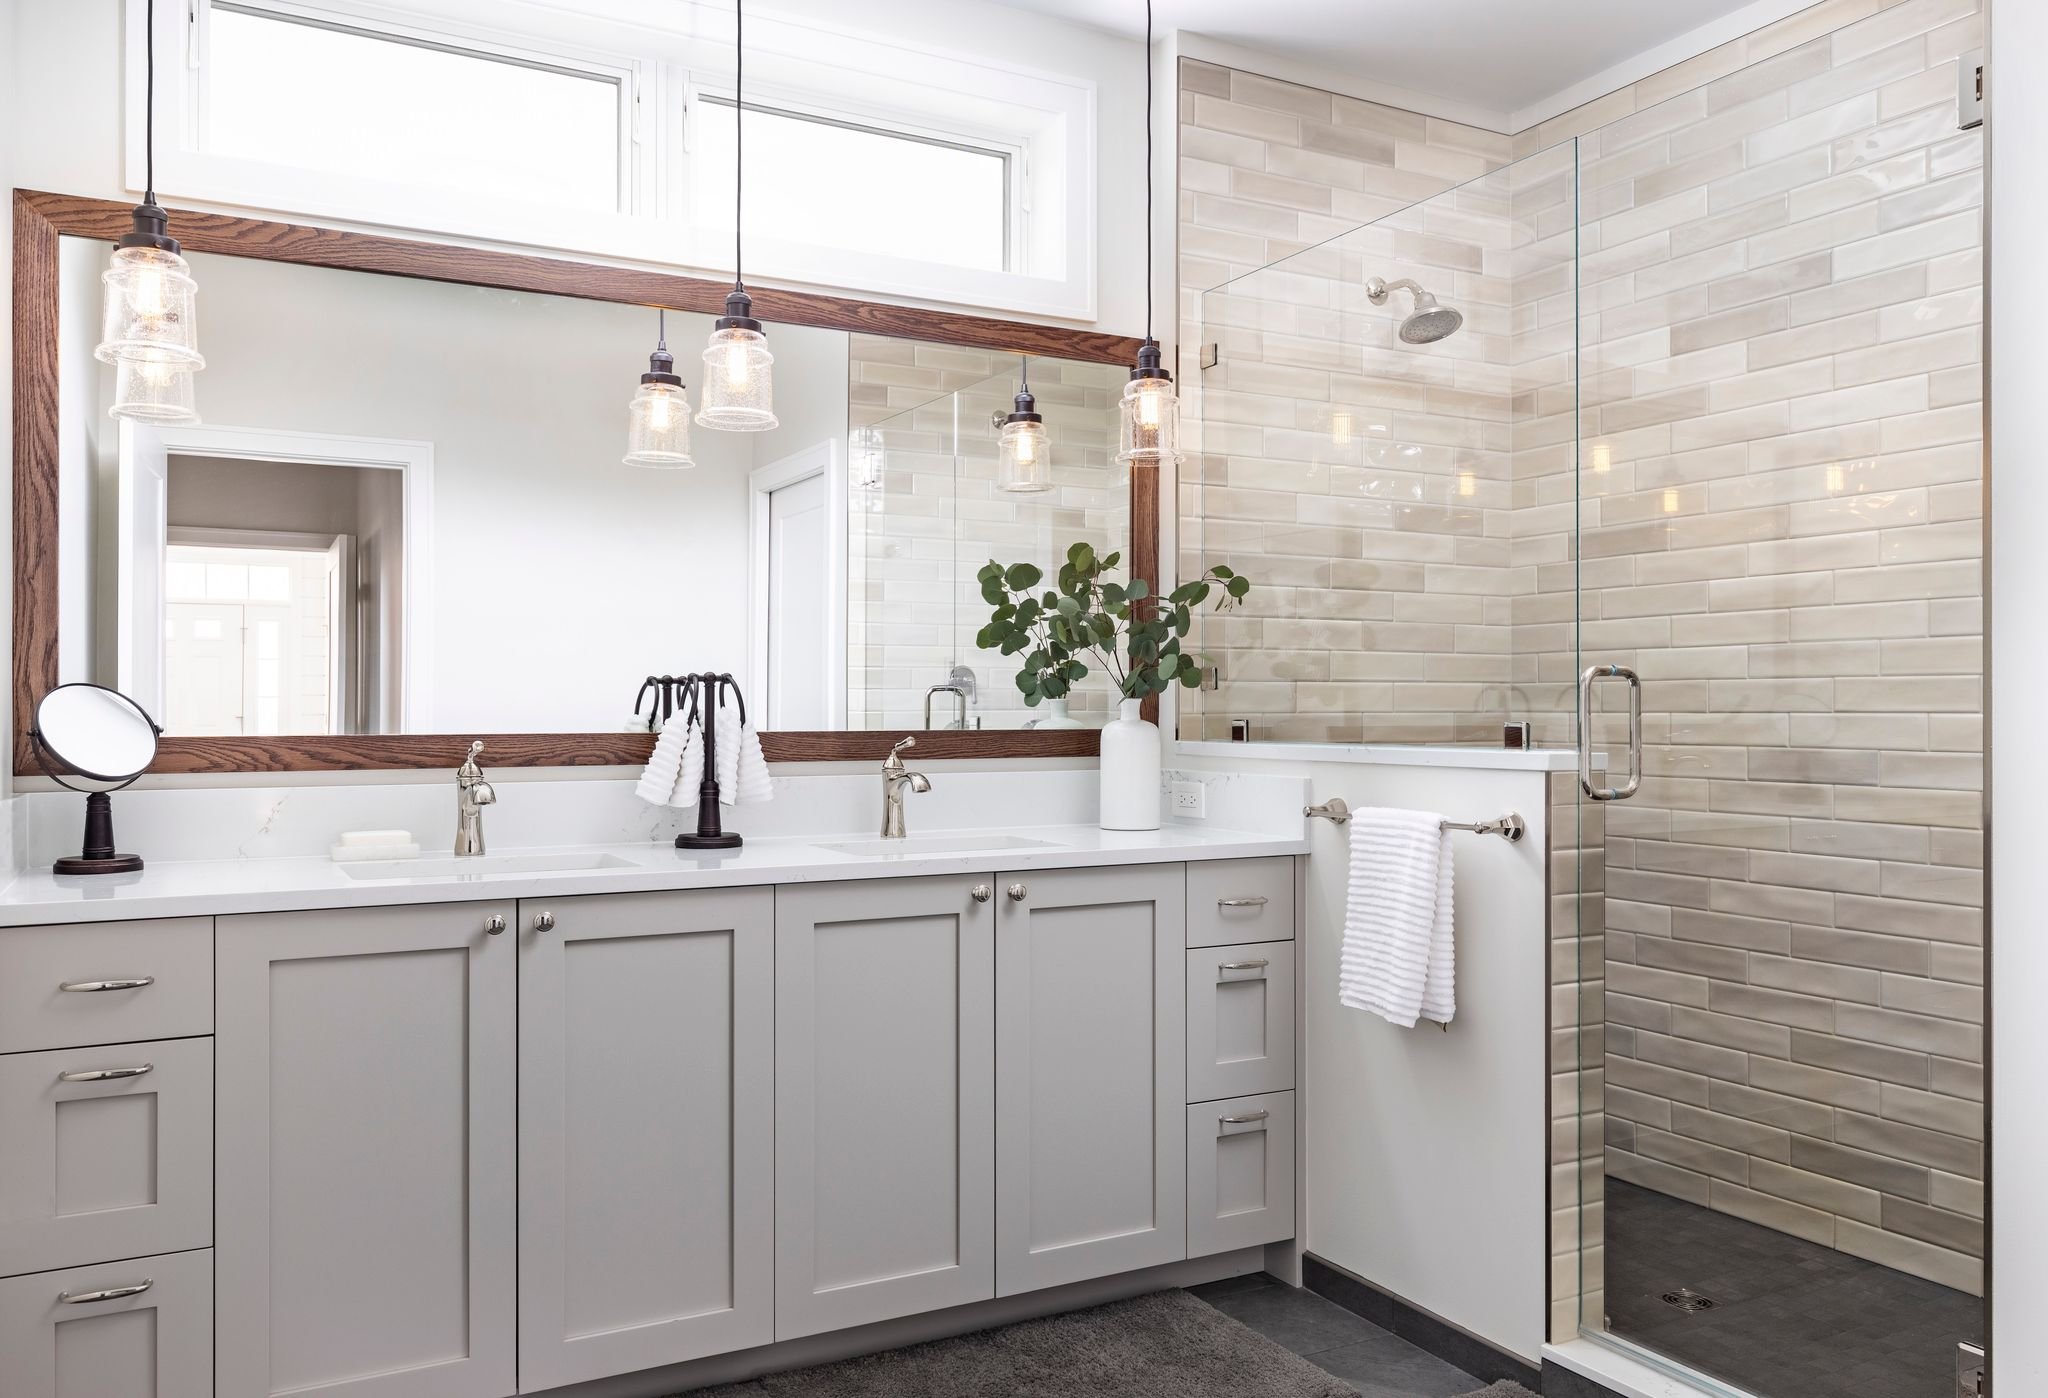 Maximizing Storage Space in a Remodeled Bathroom